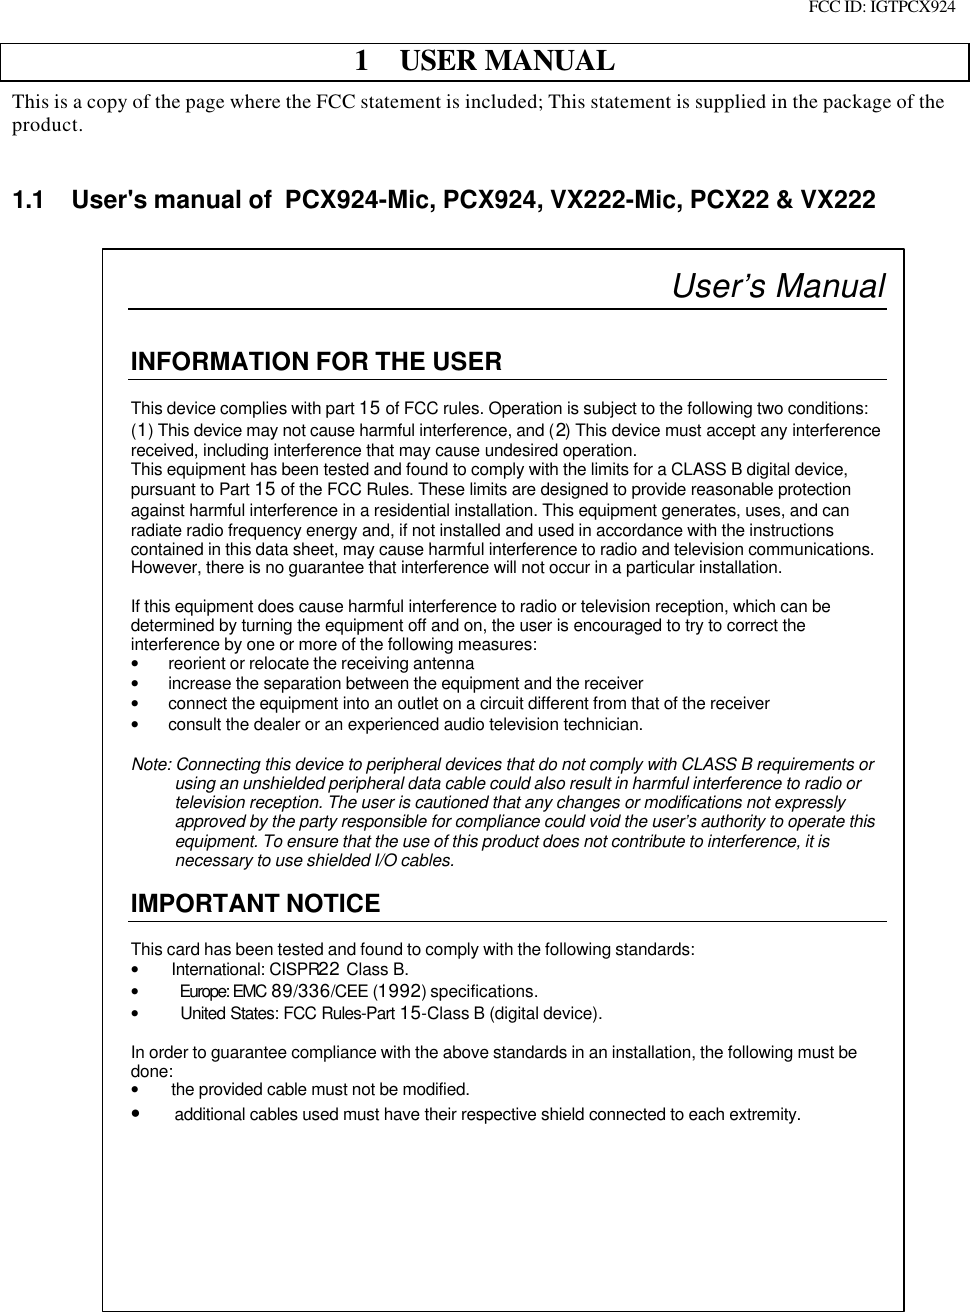 FCC ID: IGTPCX9241 USER MANUALThis is a copy of the page where the FCC statement is included; This statement is supplied in the package of theproduct.1.1 User&apos;s manual of  PCX924-Mic, PCX924, VX222-Mic, PCX22 &amp; VX222User’s ManualINFORMATION FOR THE USERThis device complies with part 15 of FCC rules. Operation is subject to the following two conditions:(1) This device may not cause harmful interference, and (2) This device must accept any interferencereceived, including interference that may cause undesired operation.This equipment has been tested and found to comply with the limits for a CLASS B digital device,pursuant to Part 15 of the FCC Rules. These limits are designed to provide reasonable protectionagainst harmful interference in a residential installation. This equipment generates, uses, and canradiate radio frequency energy and, if not installed and used in accordance with the instructionscontained in this data sheet, may cause harmful interference to radio and television communications.However, there is no guarantee that interference will not occur in a particular installation.If this equipment does cause harmful interference to radio or television reception, which can bedetermined by turning the equipment off and on, the user is encouraged to try to correct theinterference by one or more of the following measures:• reorient or relocate the receiving antenna• increase the separation between the equipment and the receiver• connect the equipment into an outlet on a circuit different from that of the receiver• consult the dealer or an experienced audio television technician.Note: Connecting this device to peripheral devices that do not comply with CLASS B requirements orusing an unshielded peripheral data cable could also result in harmful interference to radio ortelevision reception. The user is cautioned that any changes or modifications not expresslyapproved by the party responsible for compliance could void the user’s authority to operate thisequipment. To ensure that the use of this product does not contribute to interference, it isnecessary to use shielded I/O cables.IMPORTANT NOTICEThis card has been tested and found to comply with the following standards:• International: CISPR22 Class B.• Europe: EMC 89/336/CEE (1992) specifications.• United States: FCC Rules-Part 15-Class B (digital device).In order to guarantee compliance with the above standards in an installation, the following must bedone:• the provided cable must not be modified.• additional cables used must have their respective shield connected to each extremity.